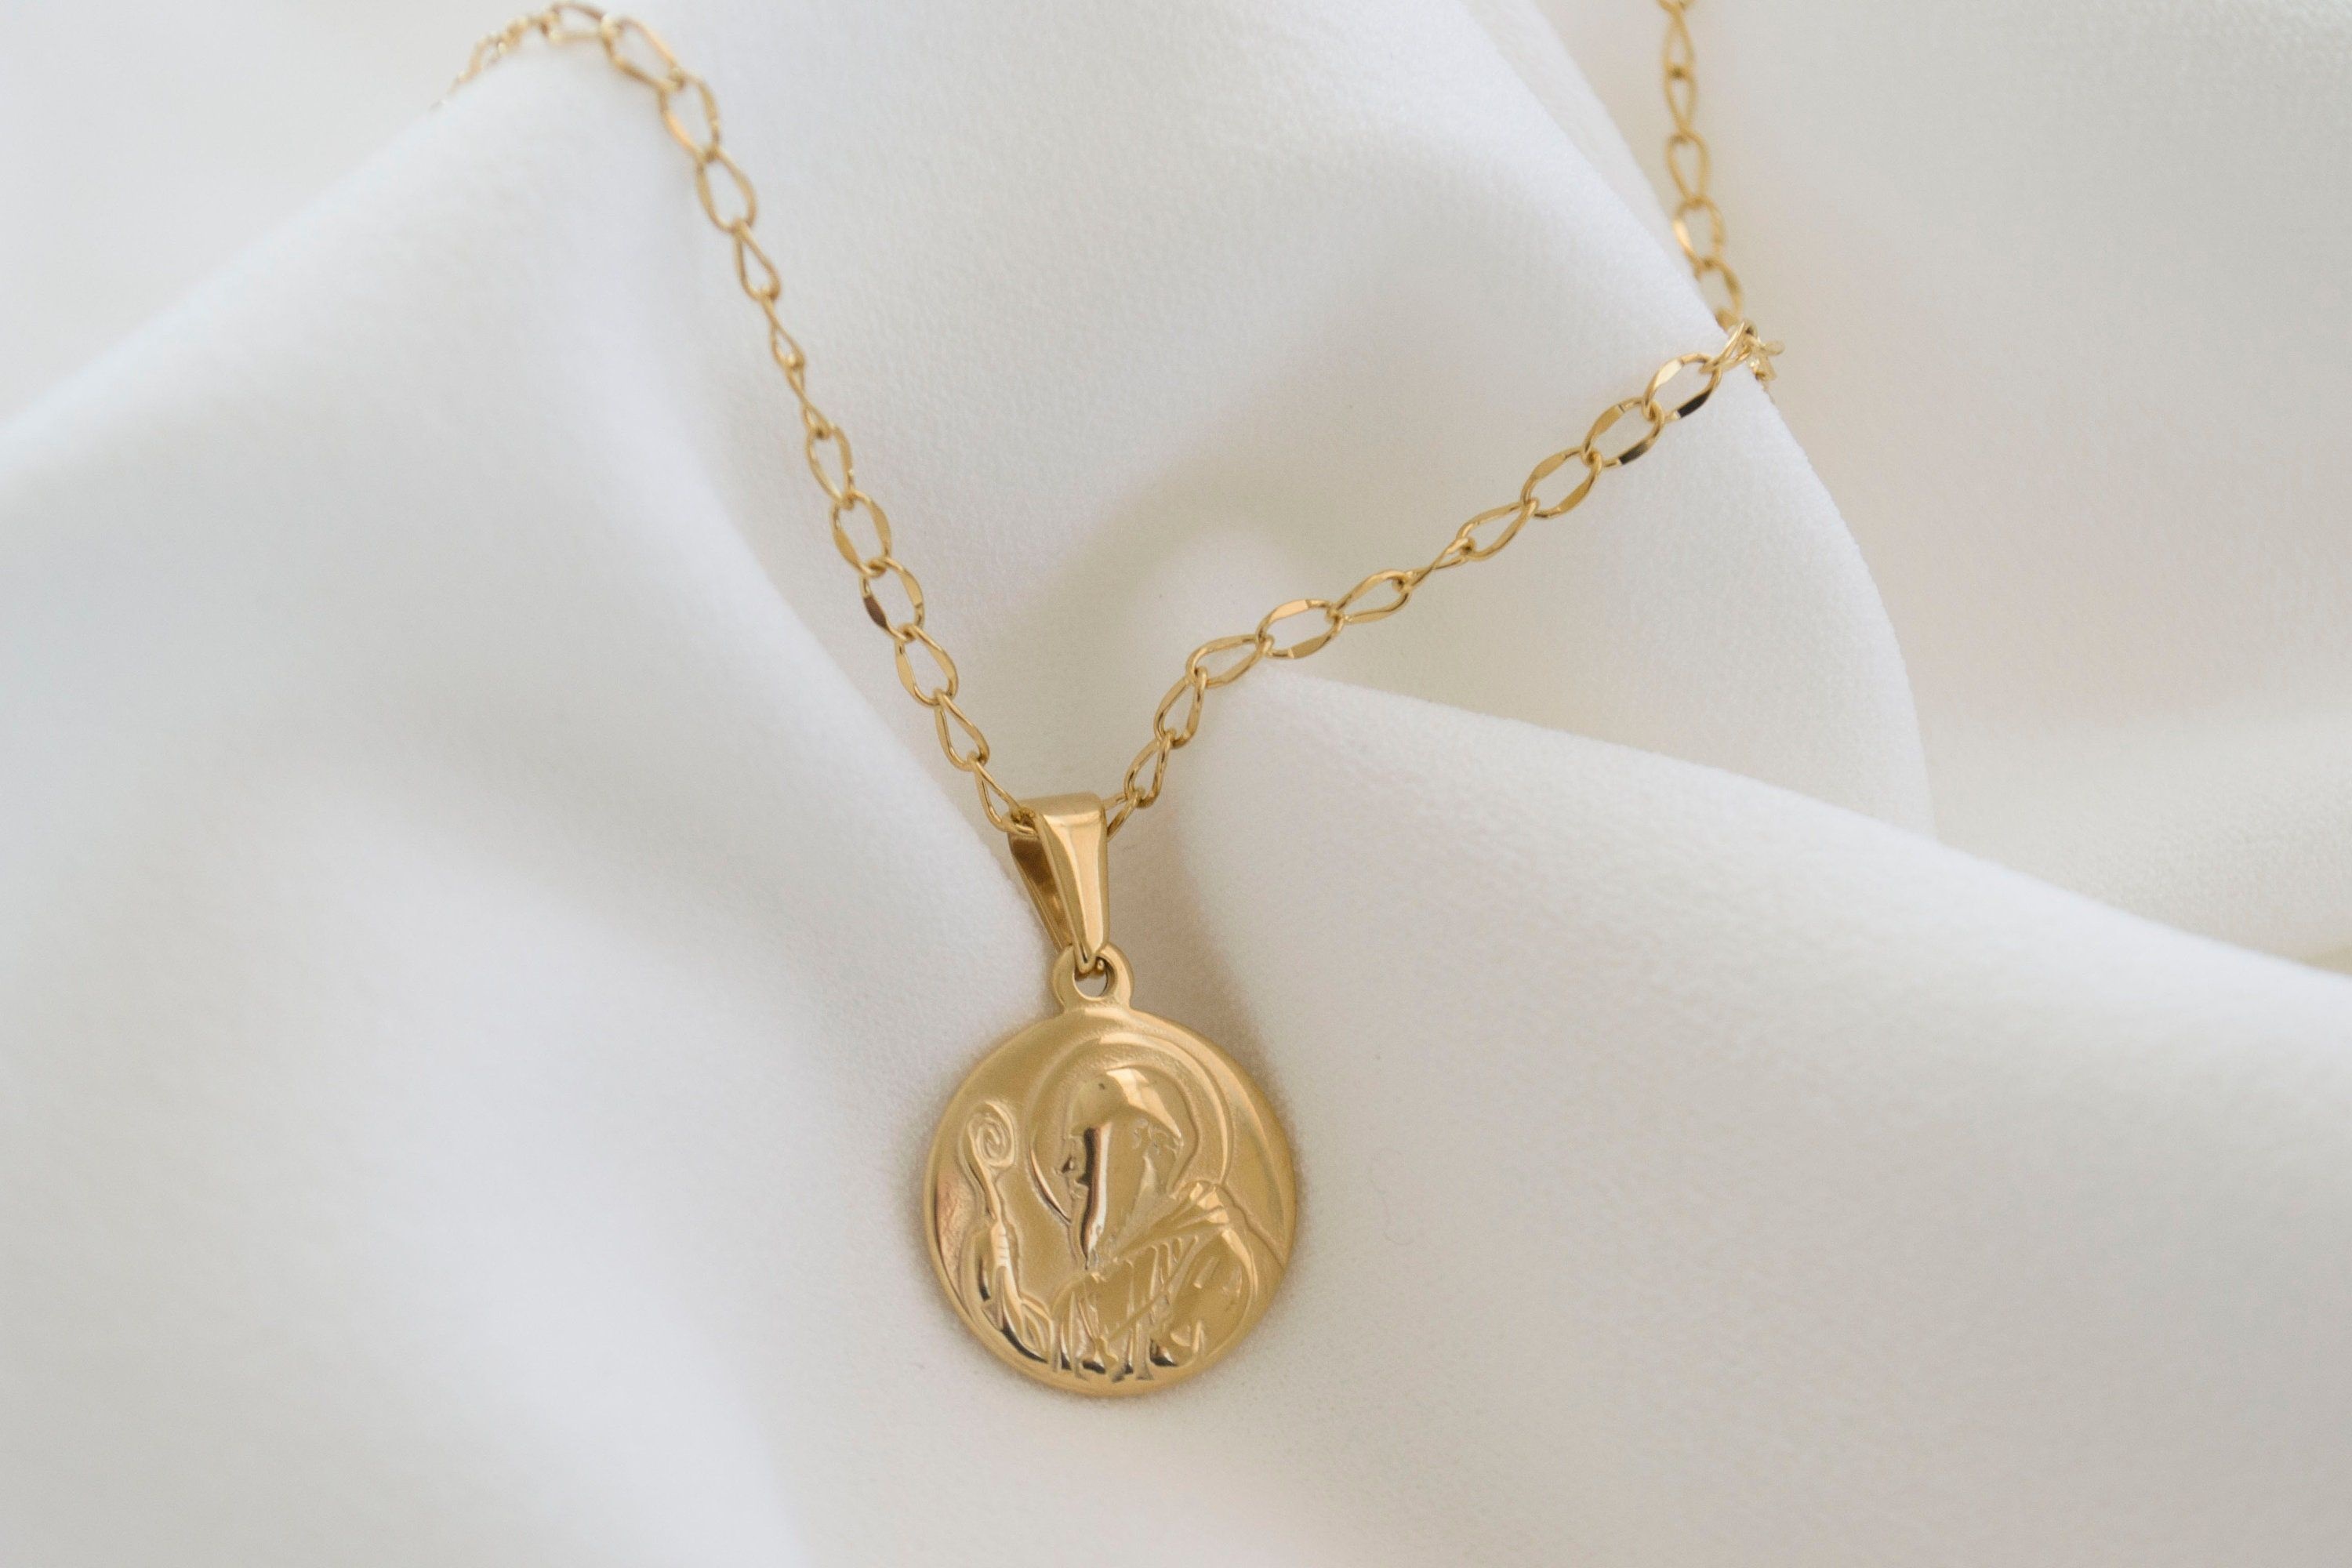 Travelers protection coin necklace, Beautiful medallion pendant, 3000x2000 HD Desktop